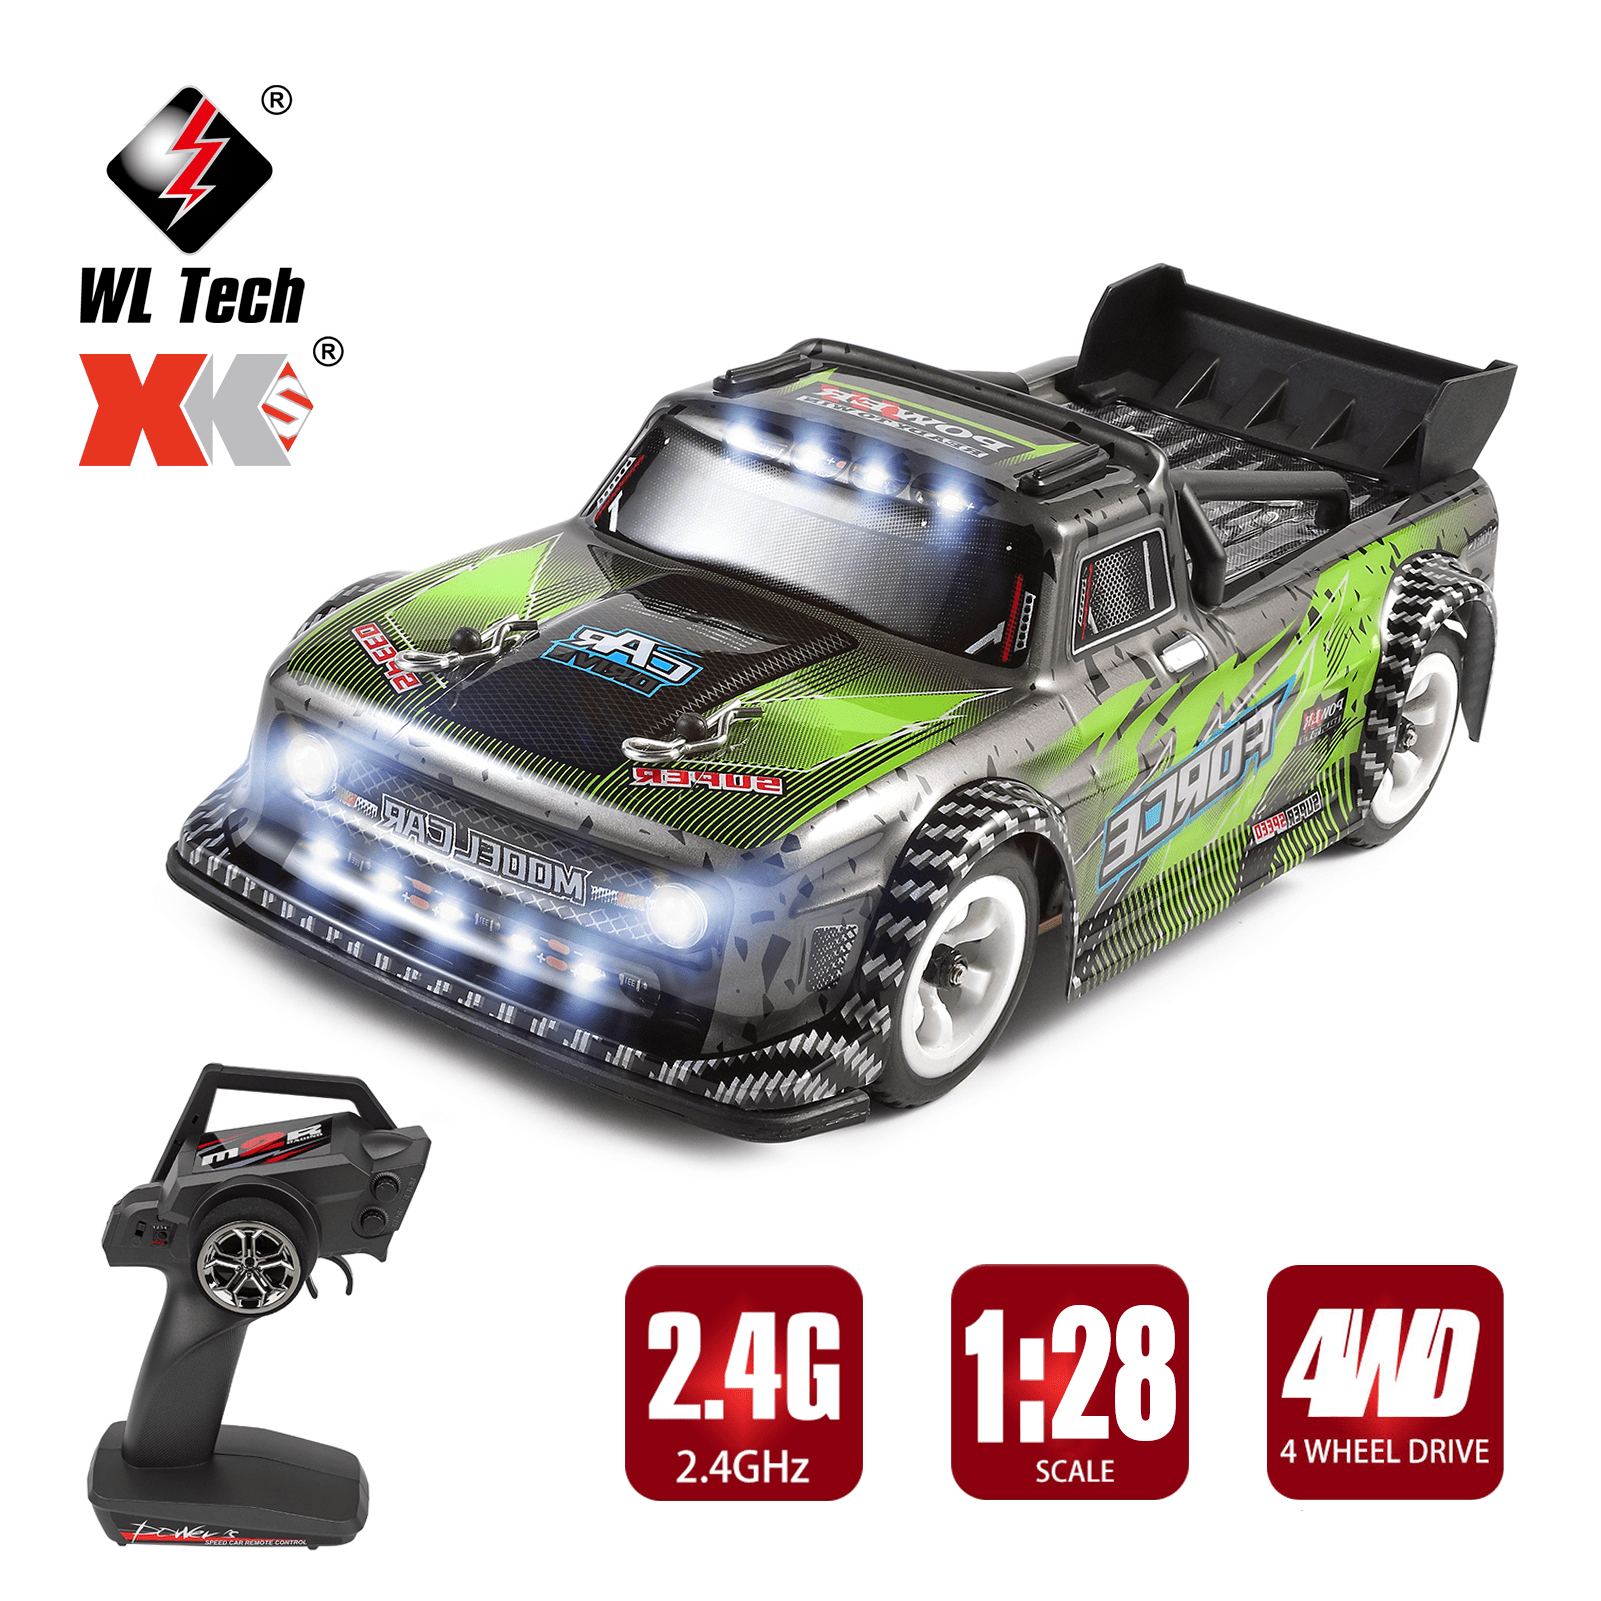 284131 RC 1/28 Short Truck Car 2.4GHz RC Race Car 30km/h High Speed Kids Gift with Metal Chassis - Walmart.com